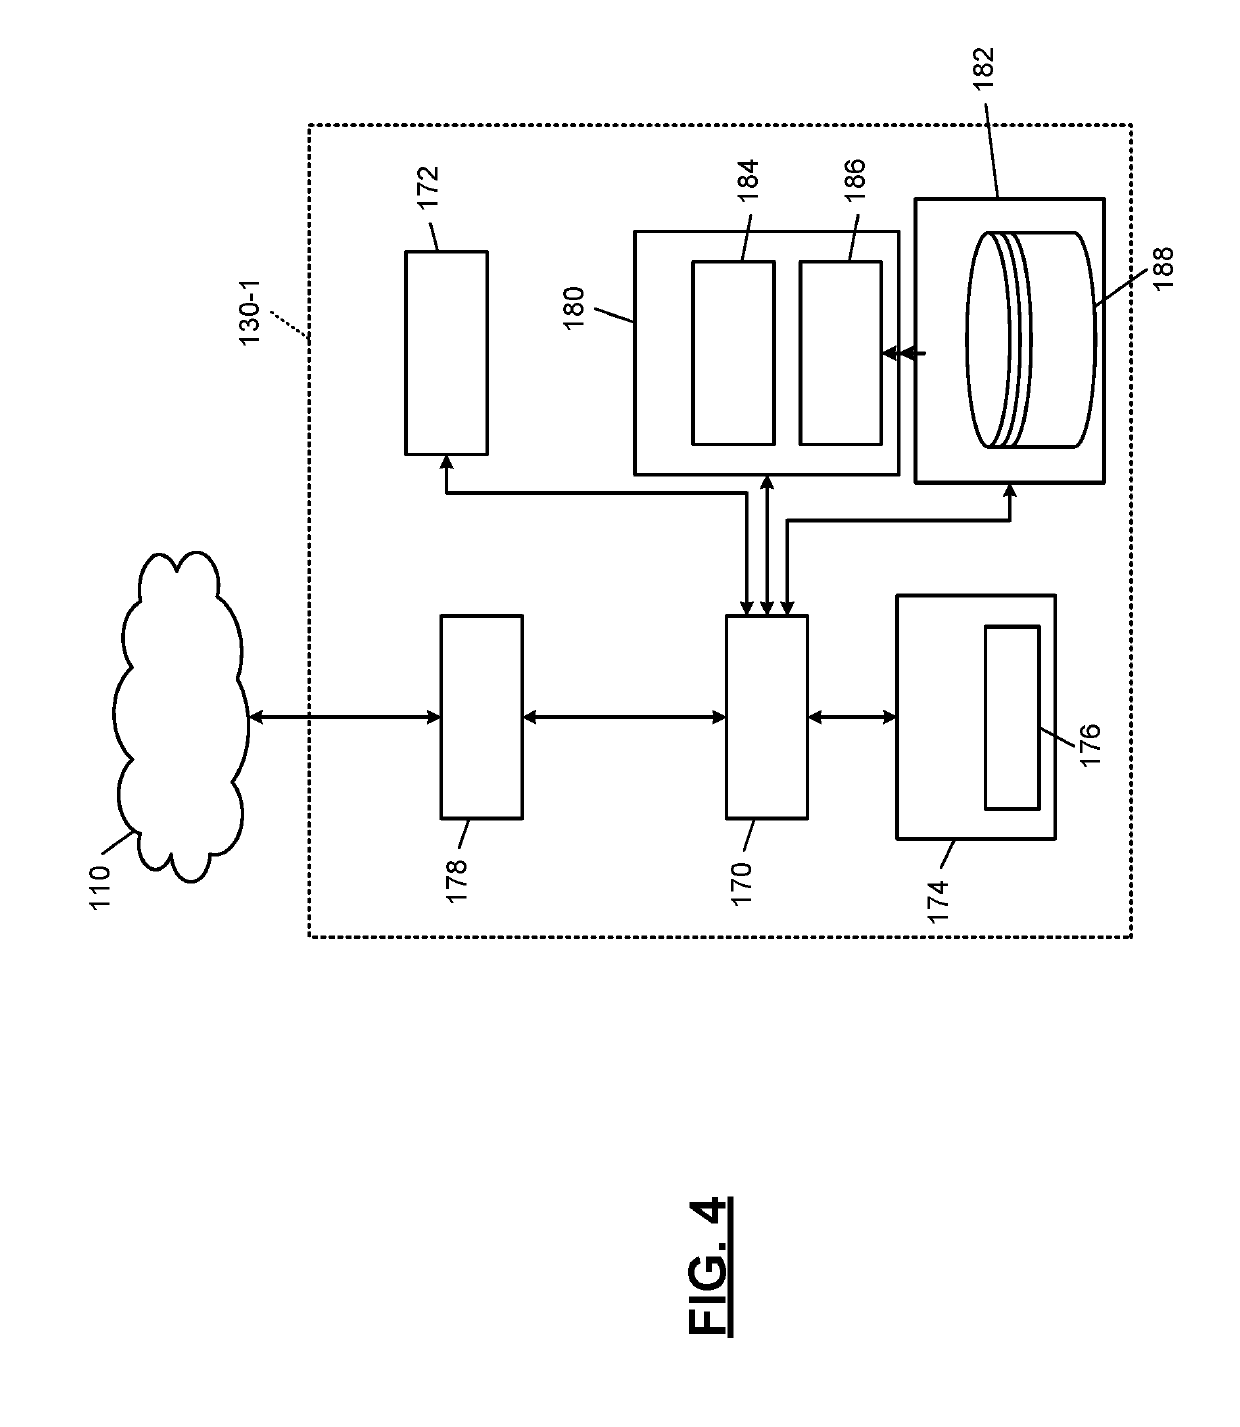 Profile building using occupant stress evaluation and profile matching for vehicle environment tuning during ride sharing